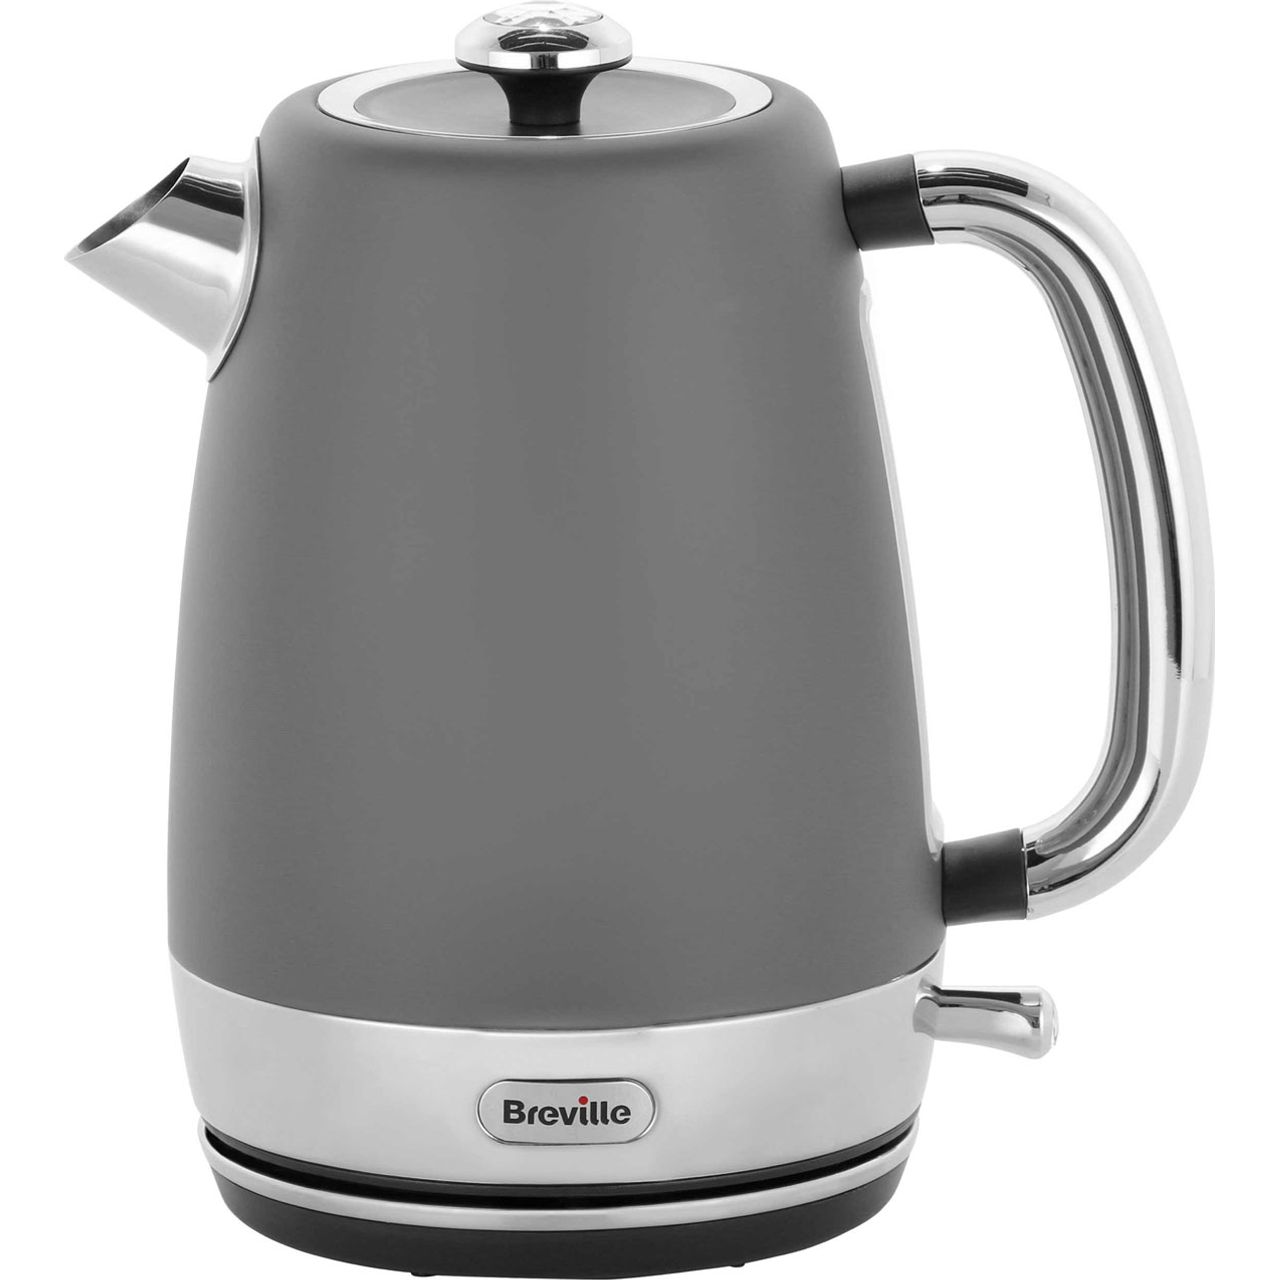 grey electric kettle